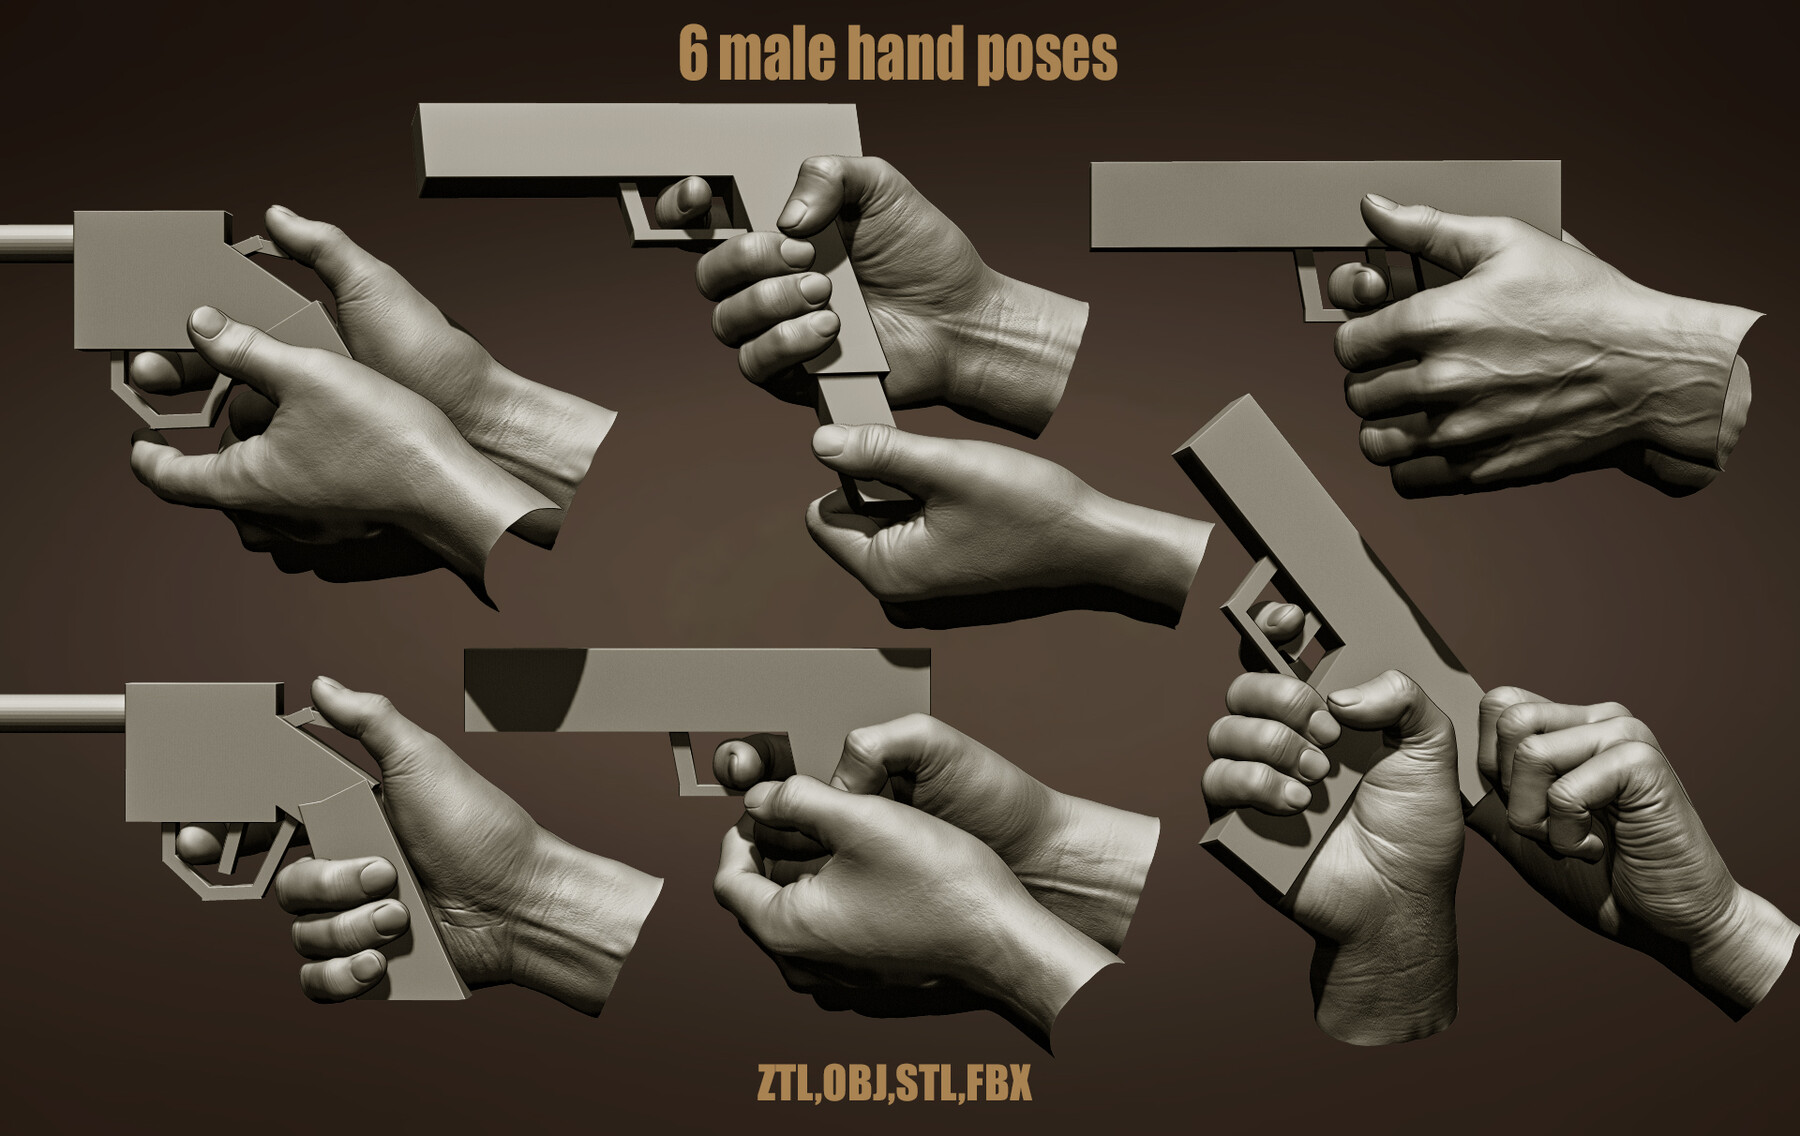 Hand Poses Vintage Illustration Vector Graphic by Raw Materials Design ·  Creative Fabrica